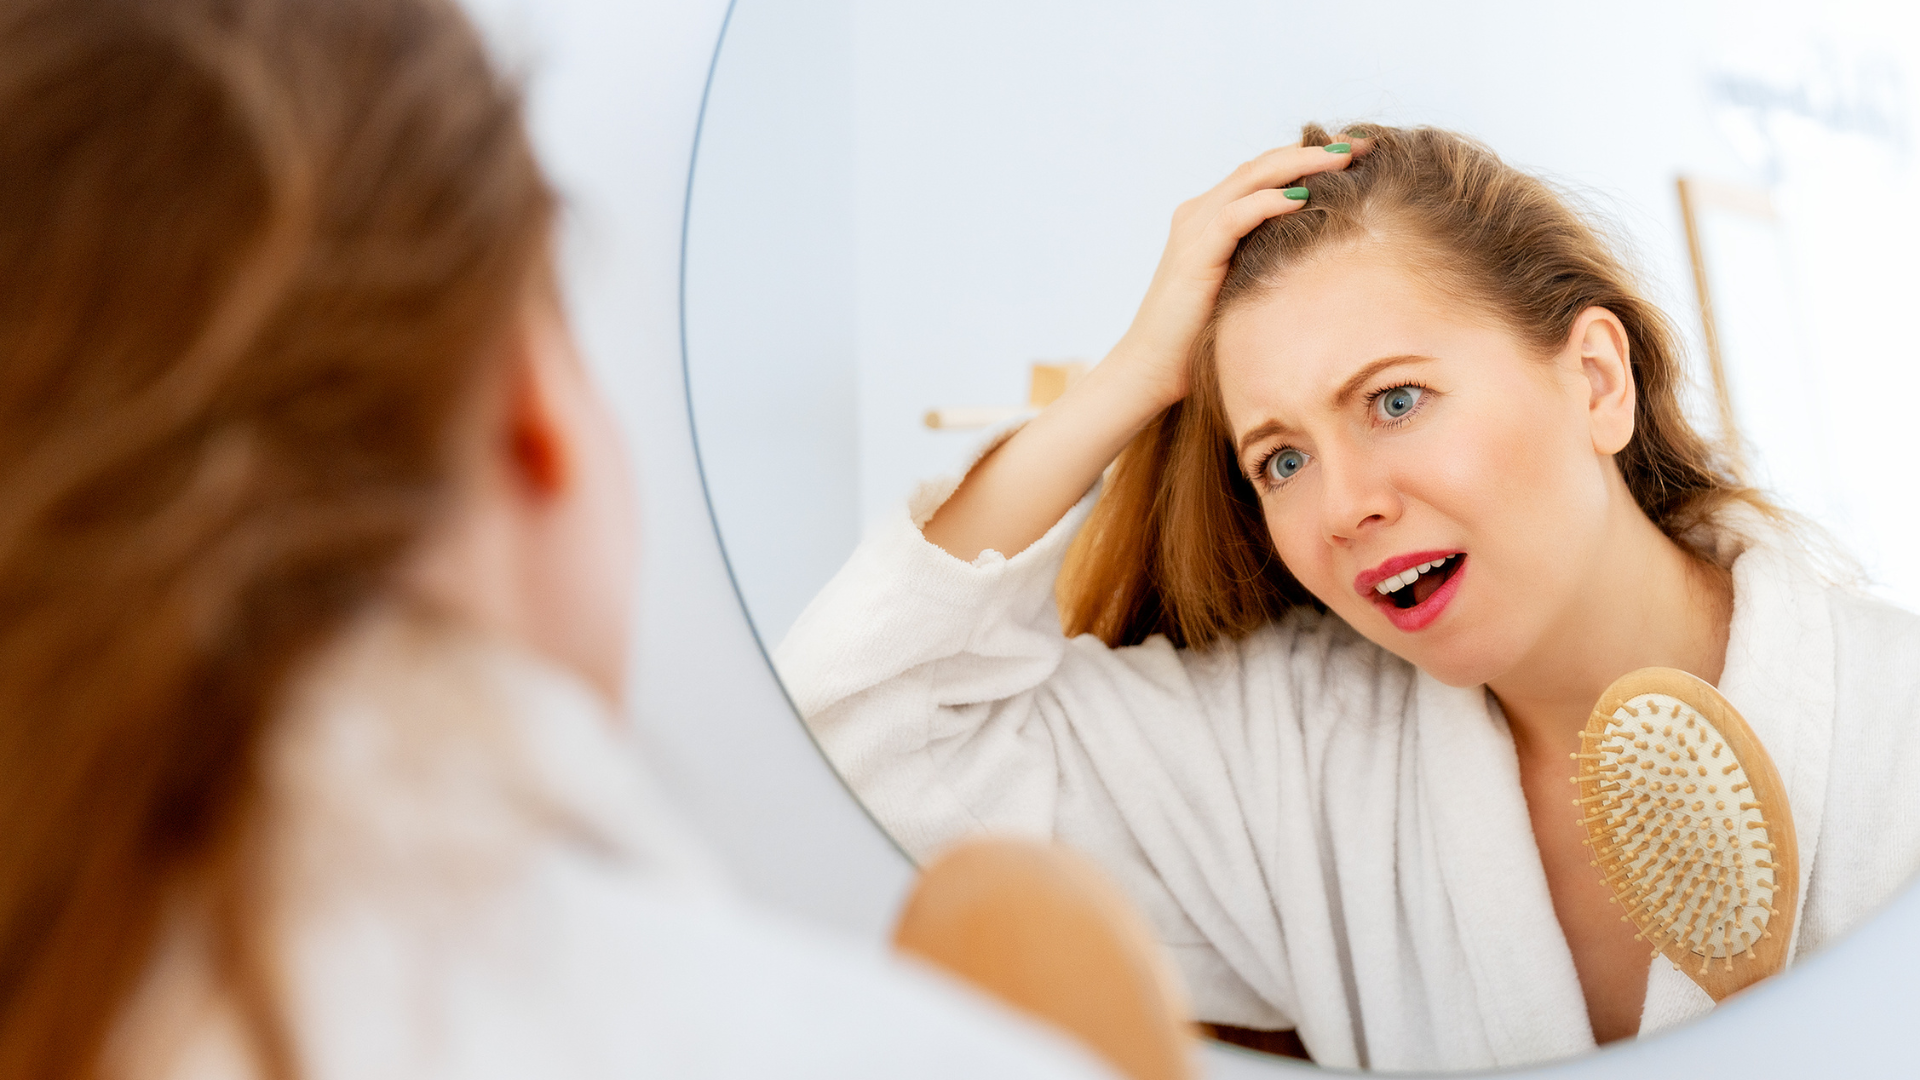 Still Dealing With A Dry, Flaky Scalp? How Redheads Can Treat It